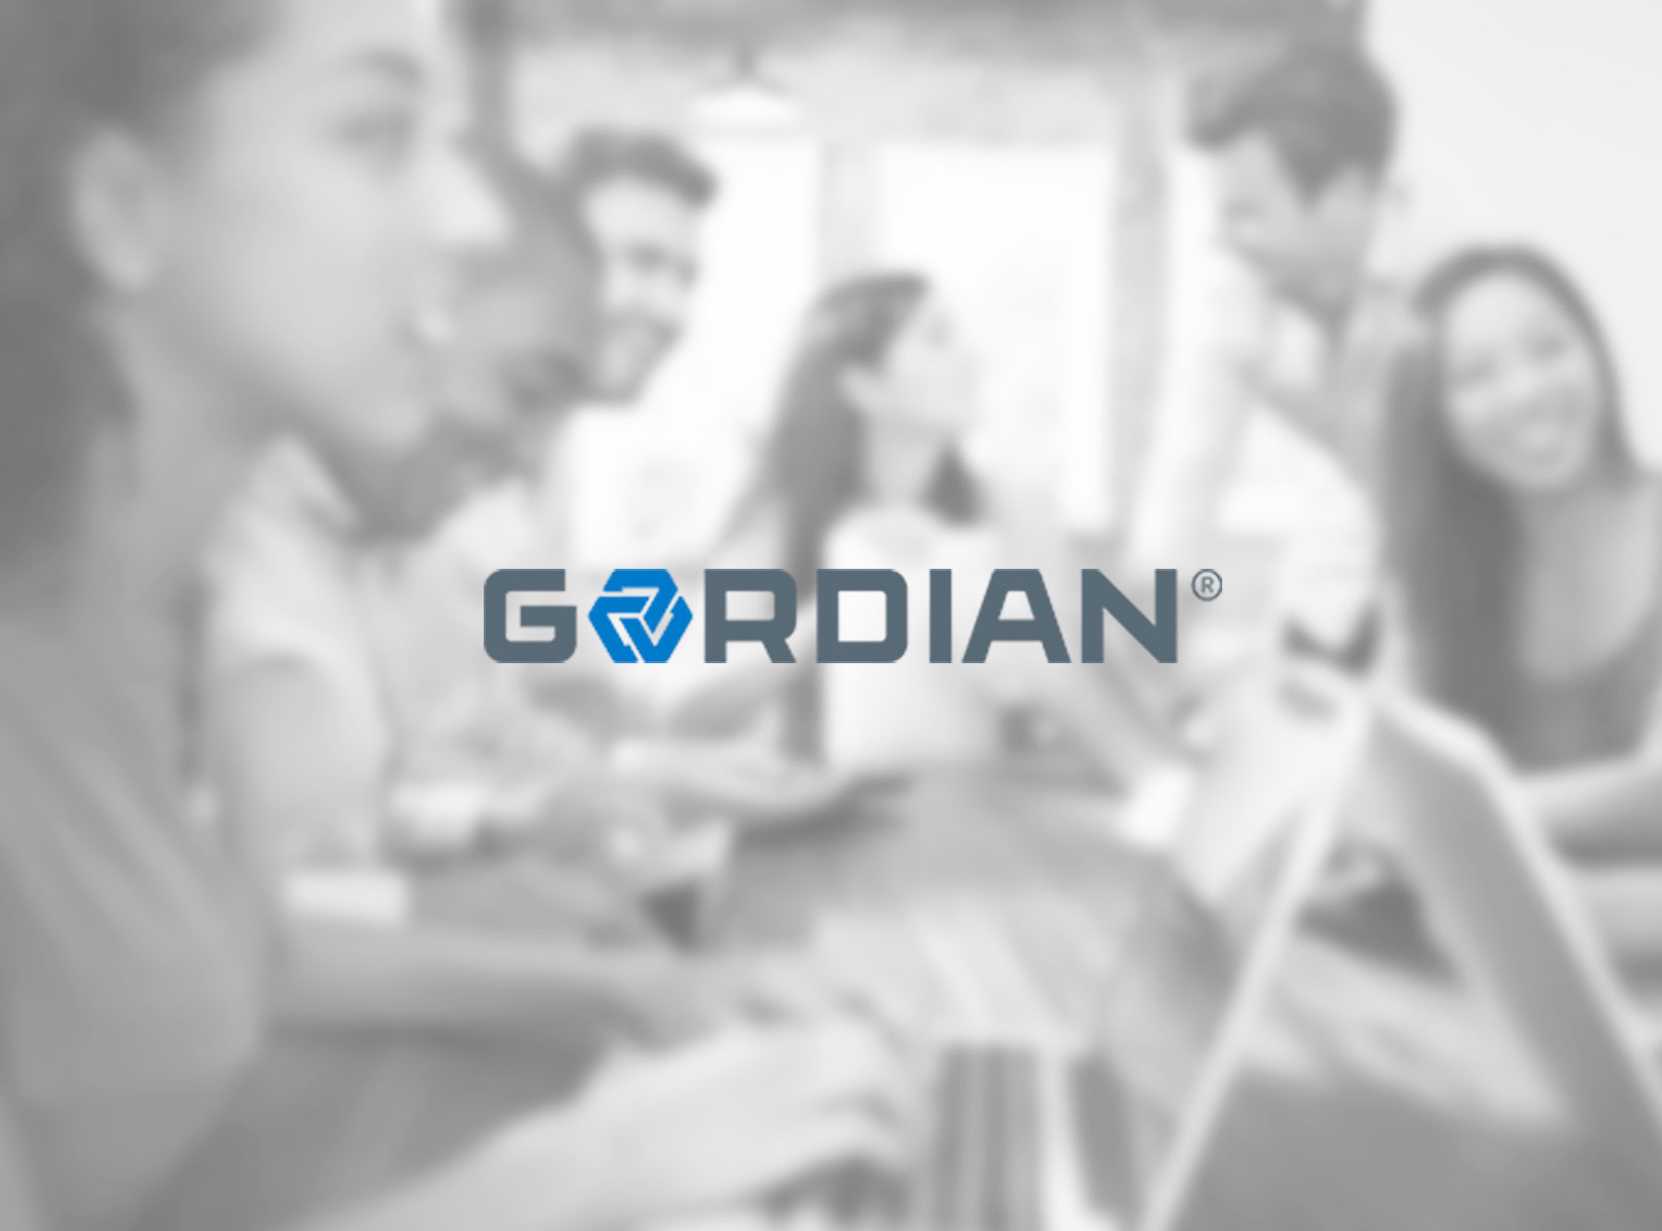 Accruent - Resources - Press Releases / News - Gordian Expands Facilities Planning Portfolio with Addition of VFA and Kykloud Solutions.   - Hero